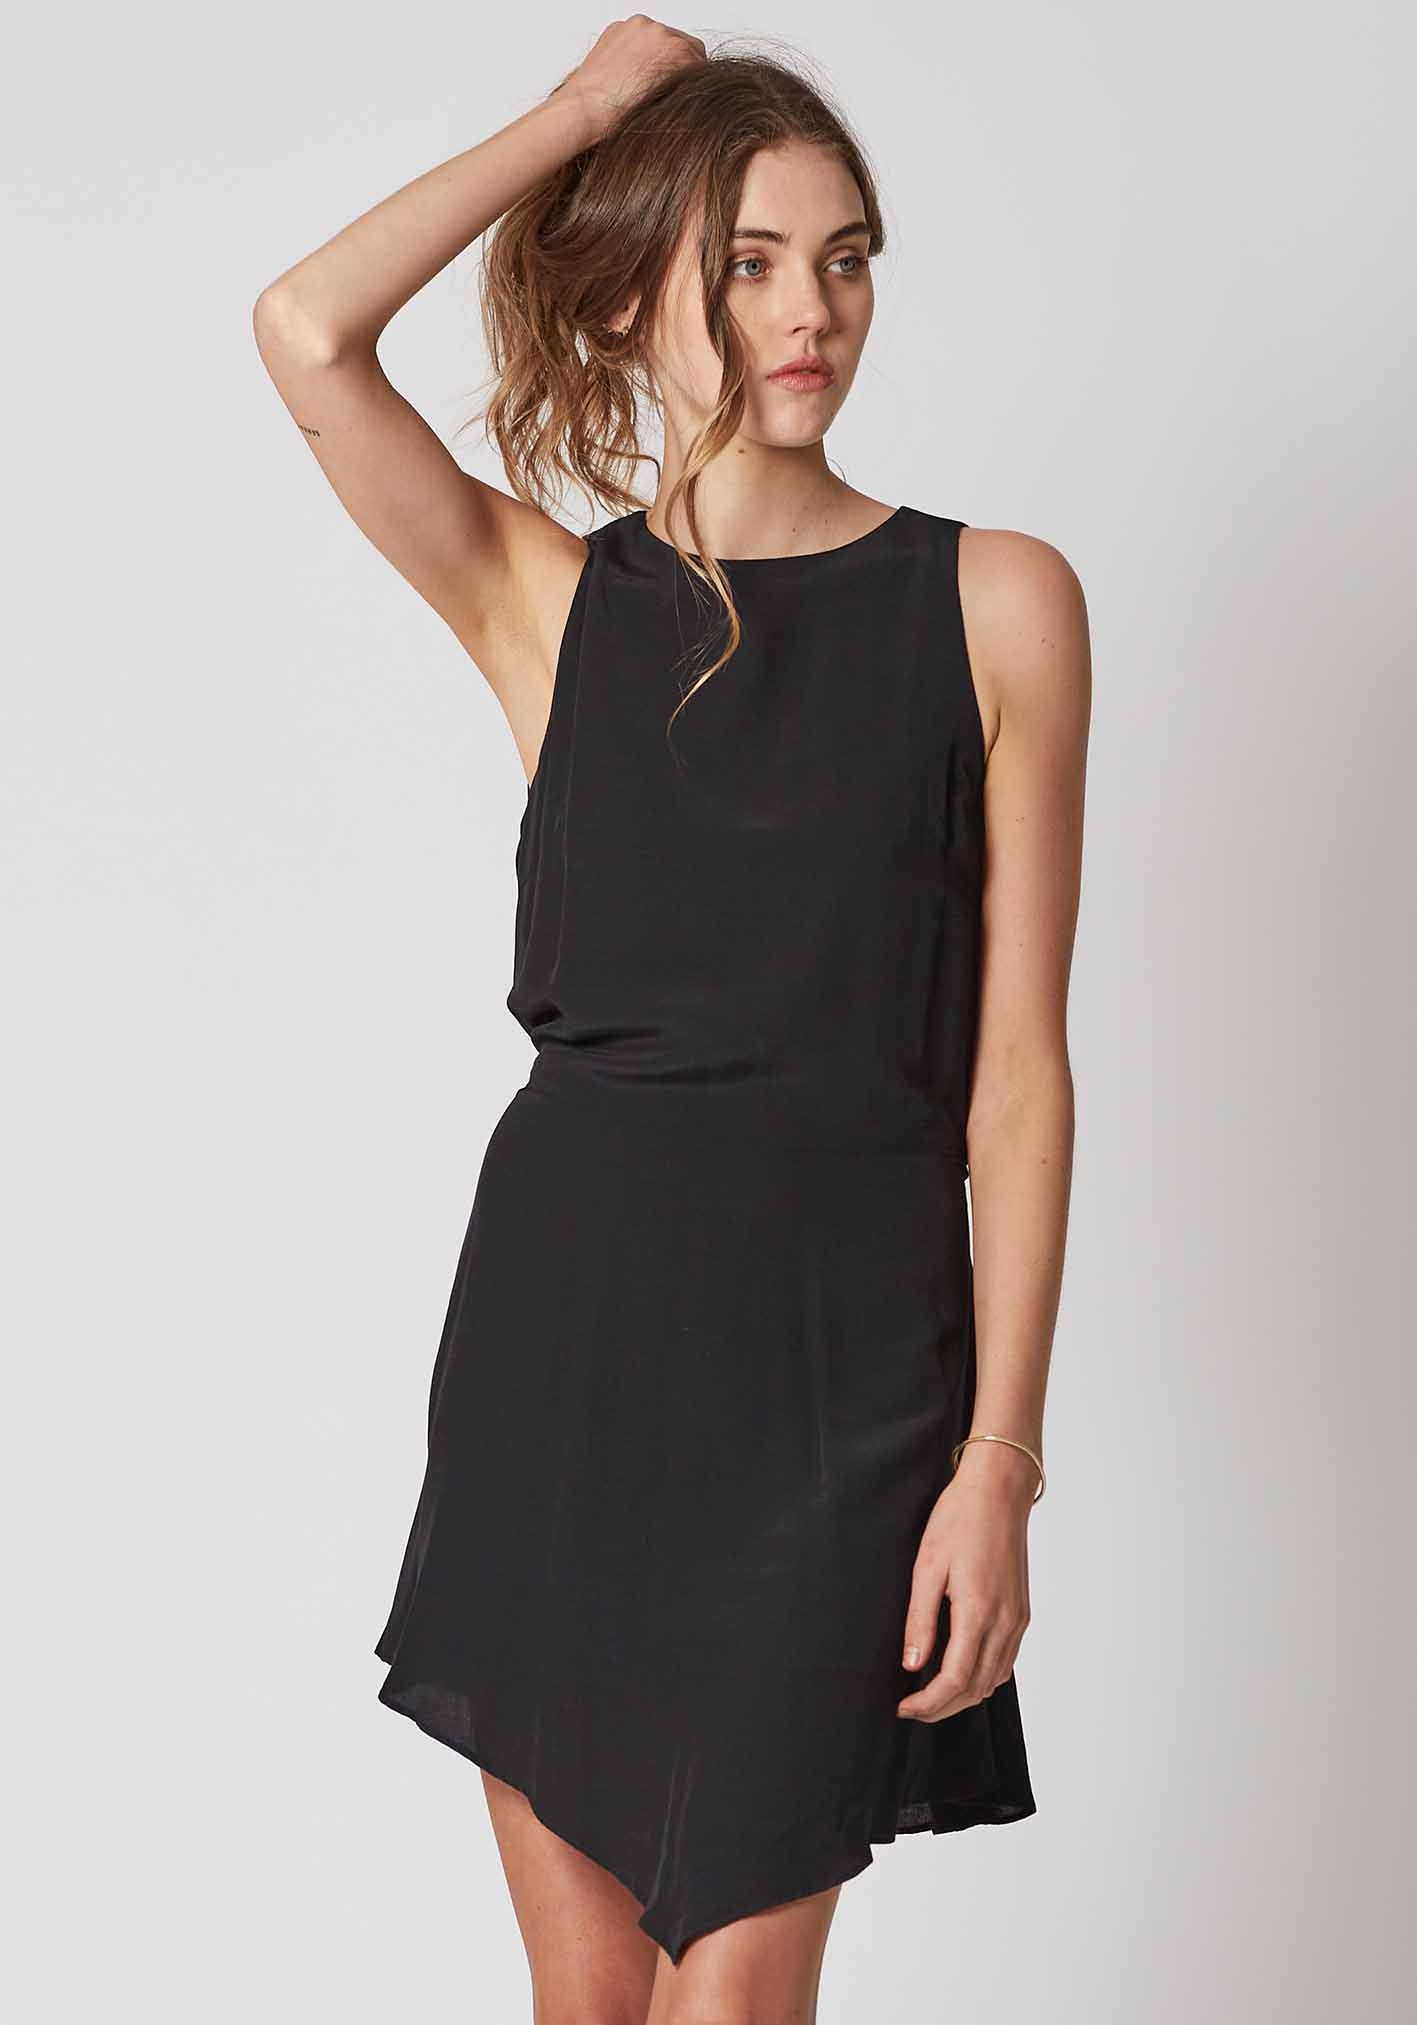 The Pocket Watch Party Dress Little Black Dress by Three of Something Australia